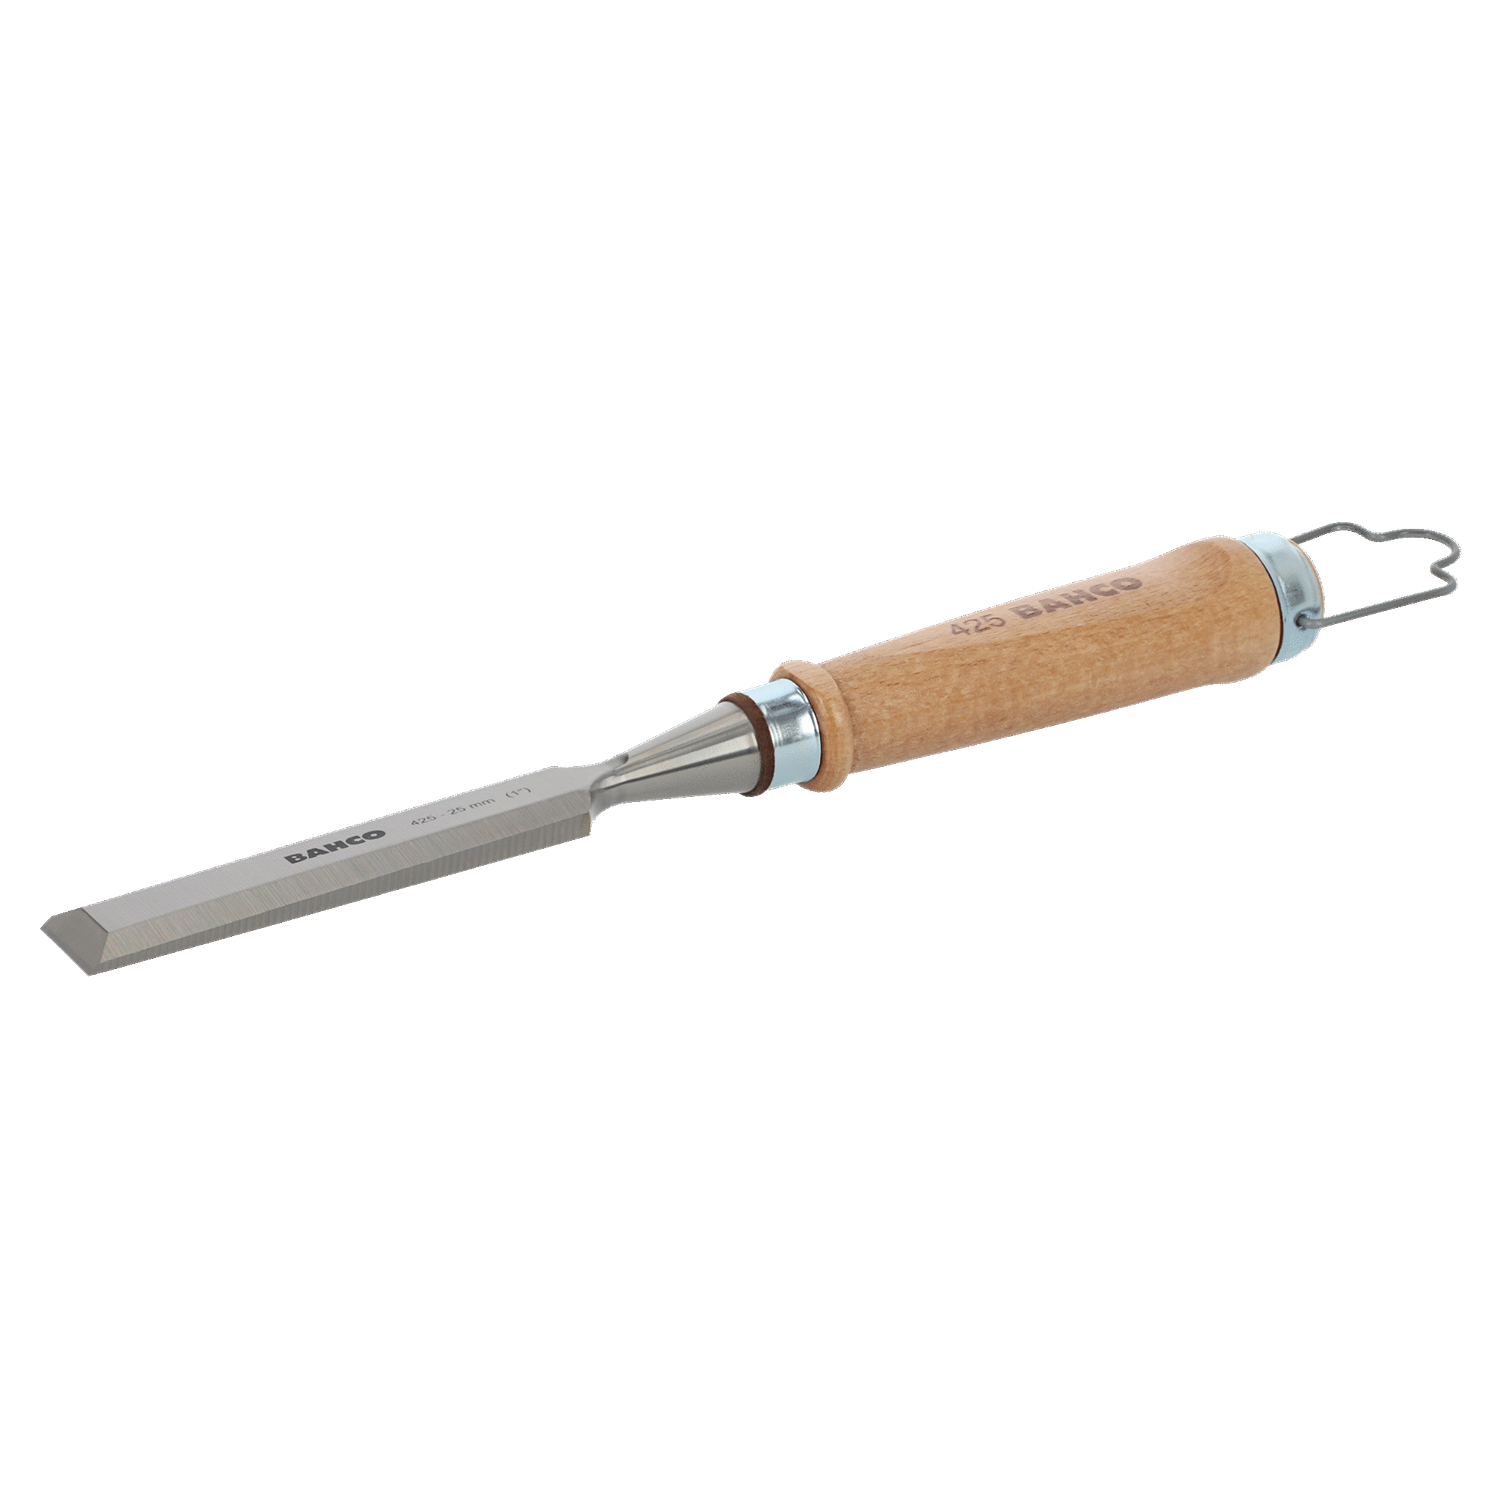 BAHCO 425 Woodworking Chisel with Wooden Handle (BAHCO Tools) - Premium Woodworking Chisel from BAHCO - Shop now at Yew Aik.